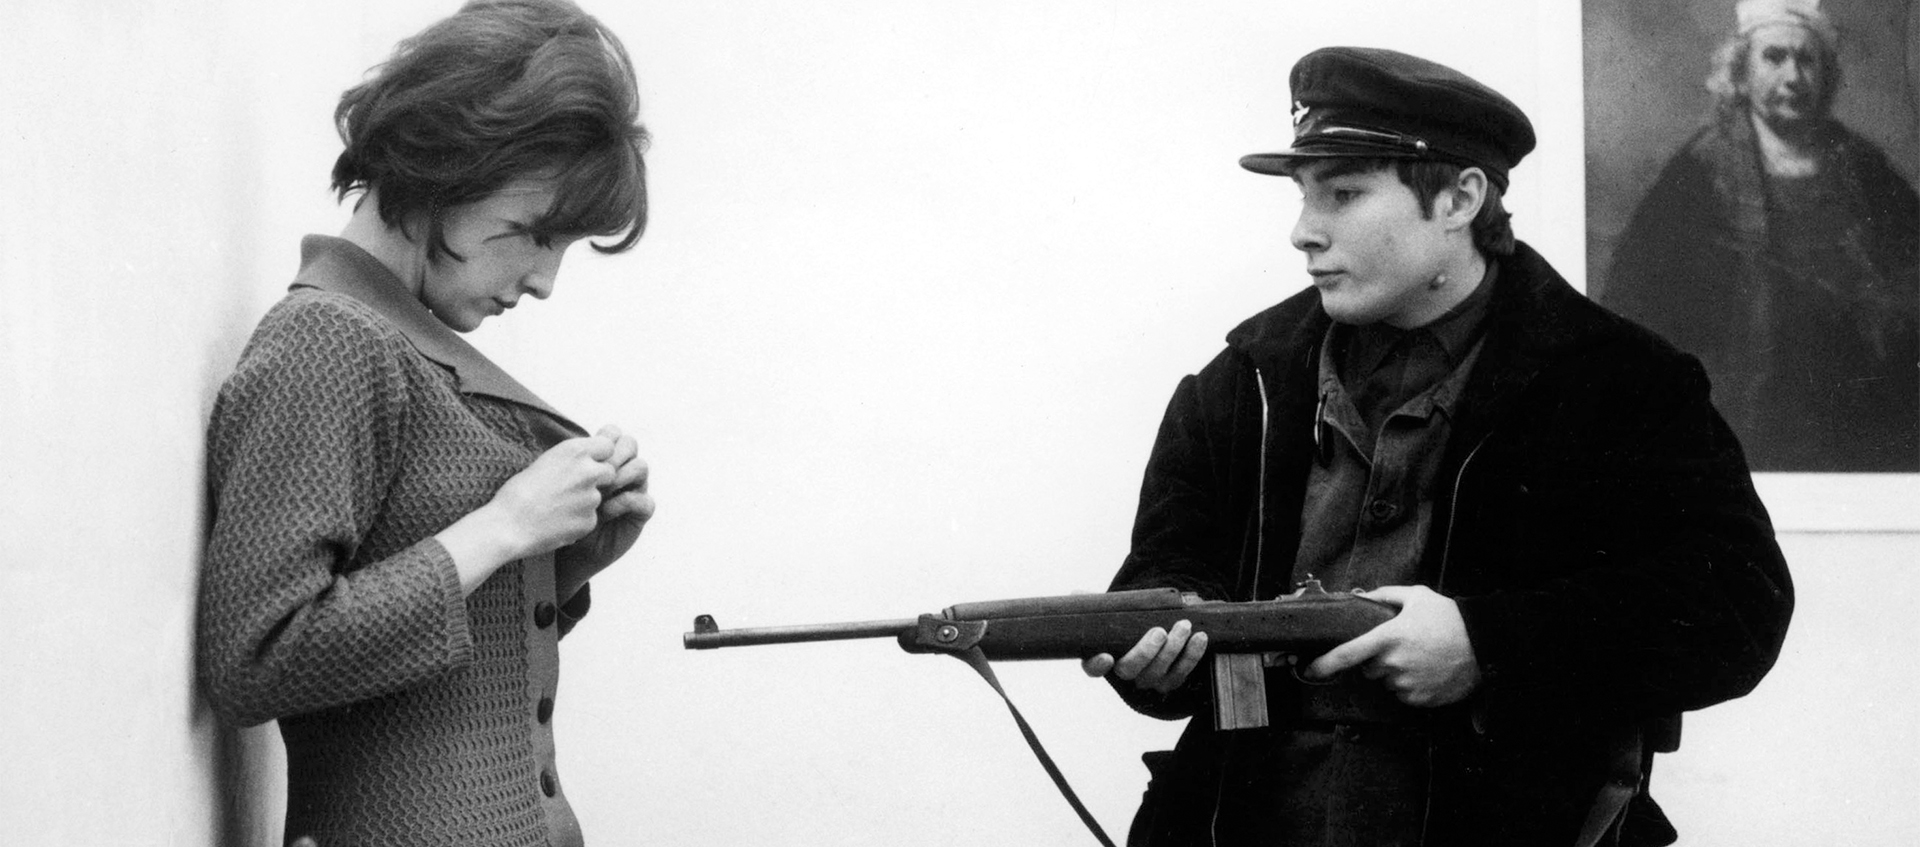 A man holds a rifle at a women in a black and white movie still